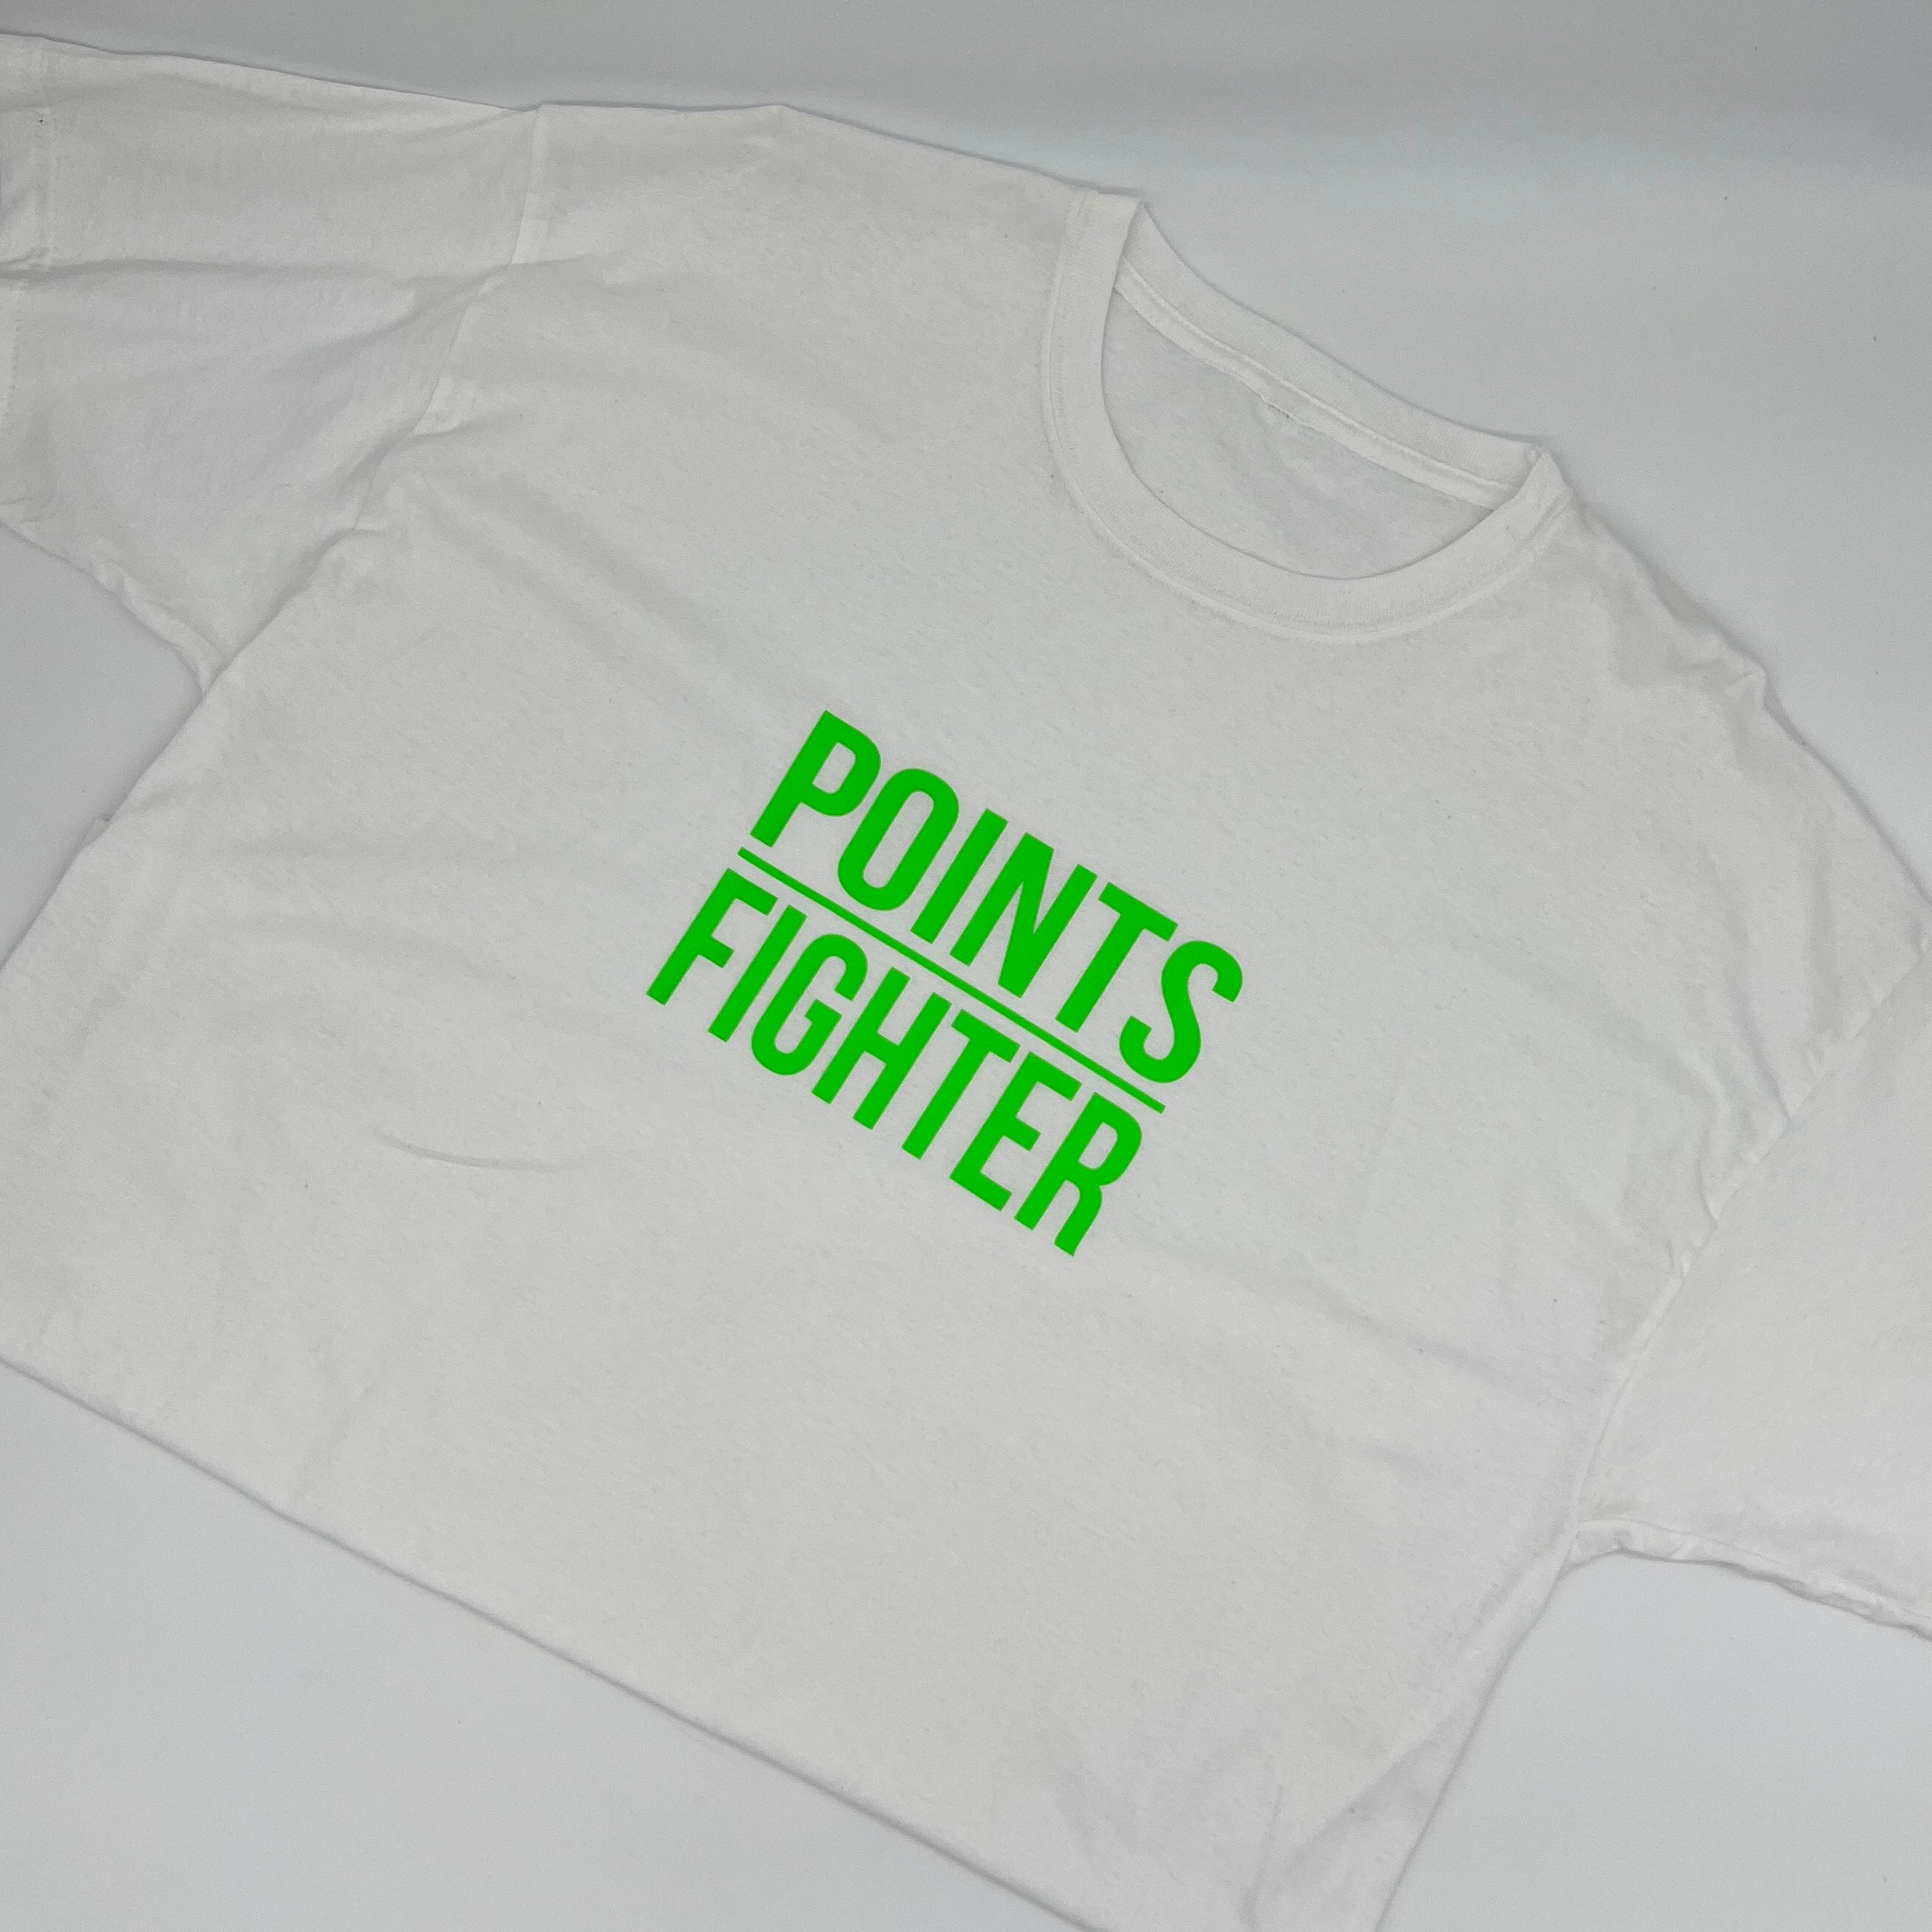 Points Fighter T-Shirt - White/Neon Green